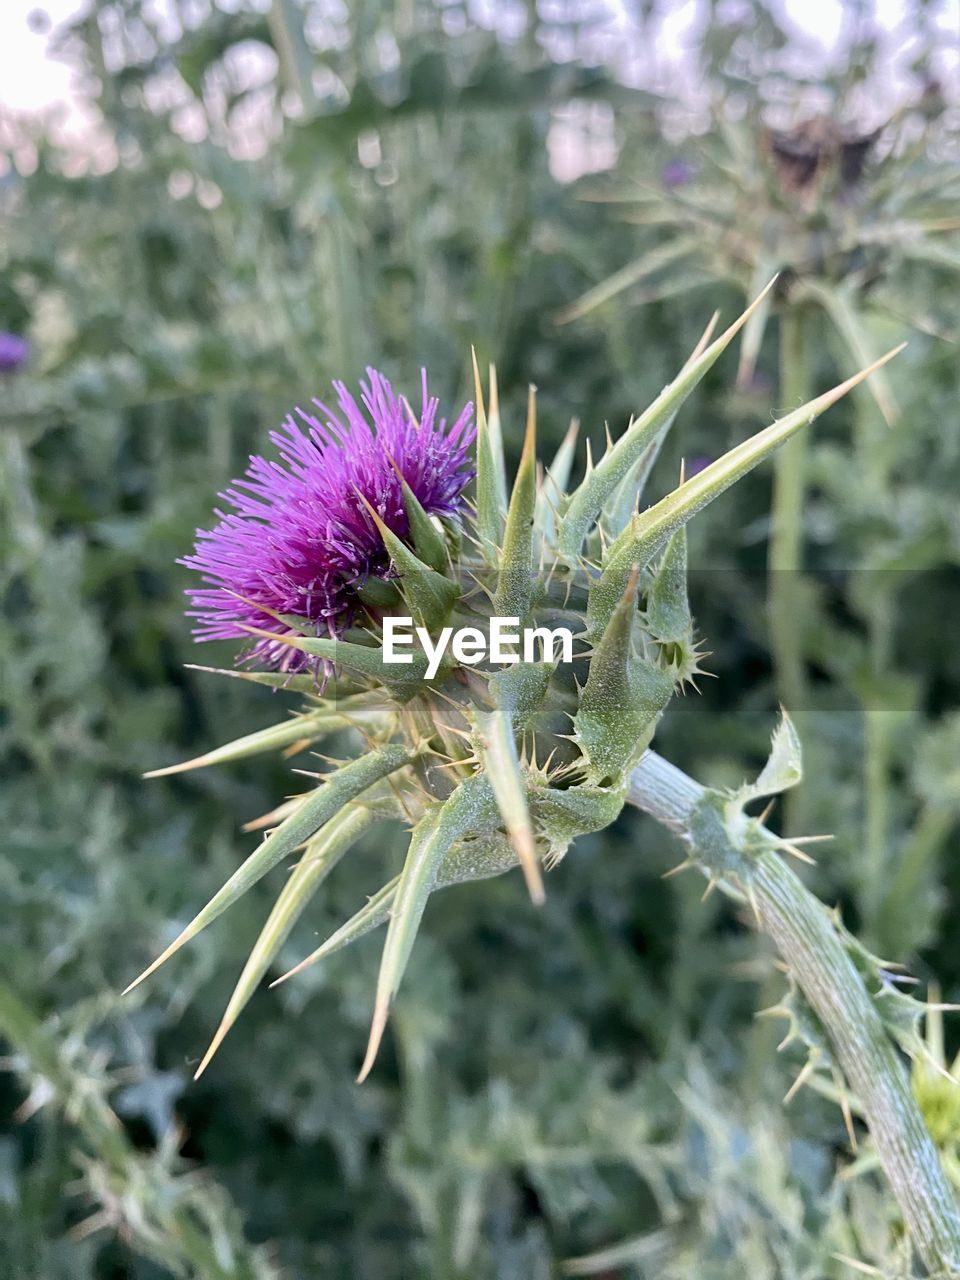 plant, thistle, flower, flowering plant, beauty in nature, growth, freshness, nature, close-up, purple, focus on foreground, fragility, wildflower, no people, flower head, inflorescence, day, outdoors, botany, petal, land, green, plant stem